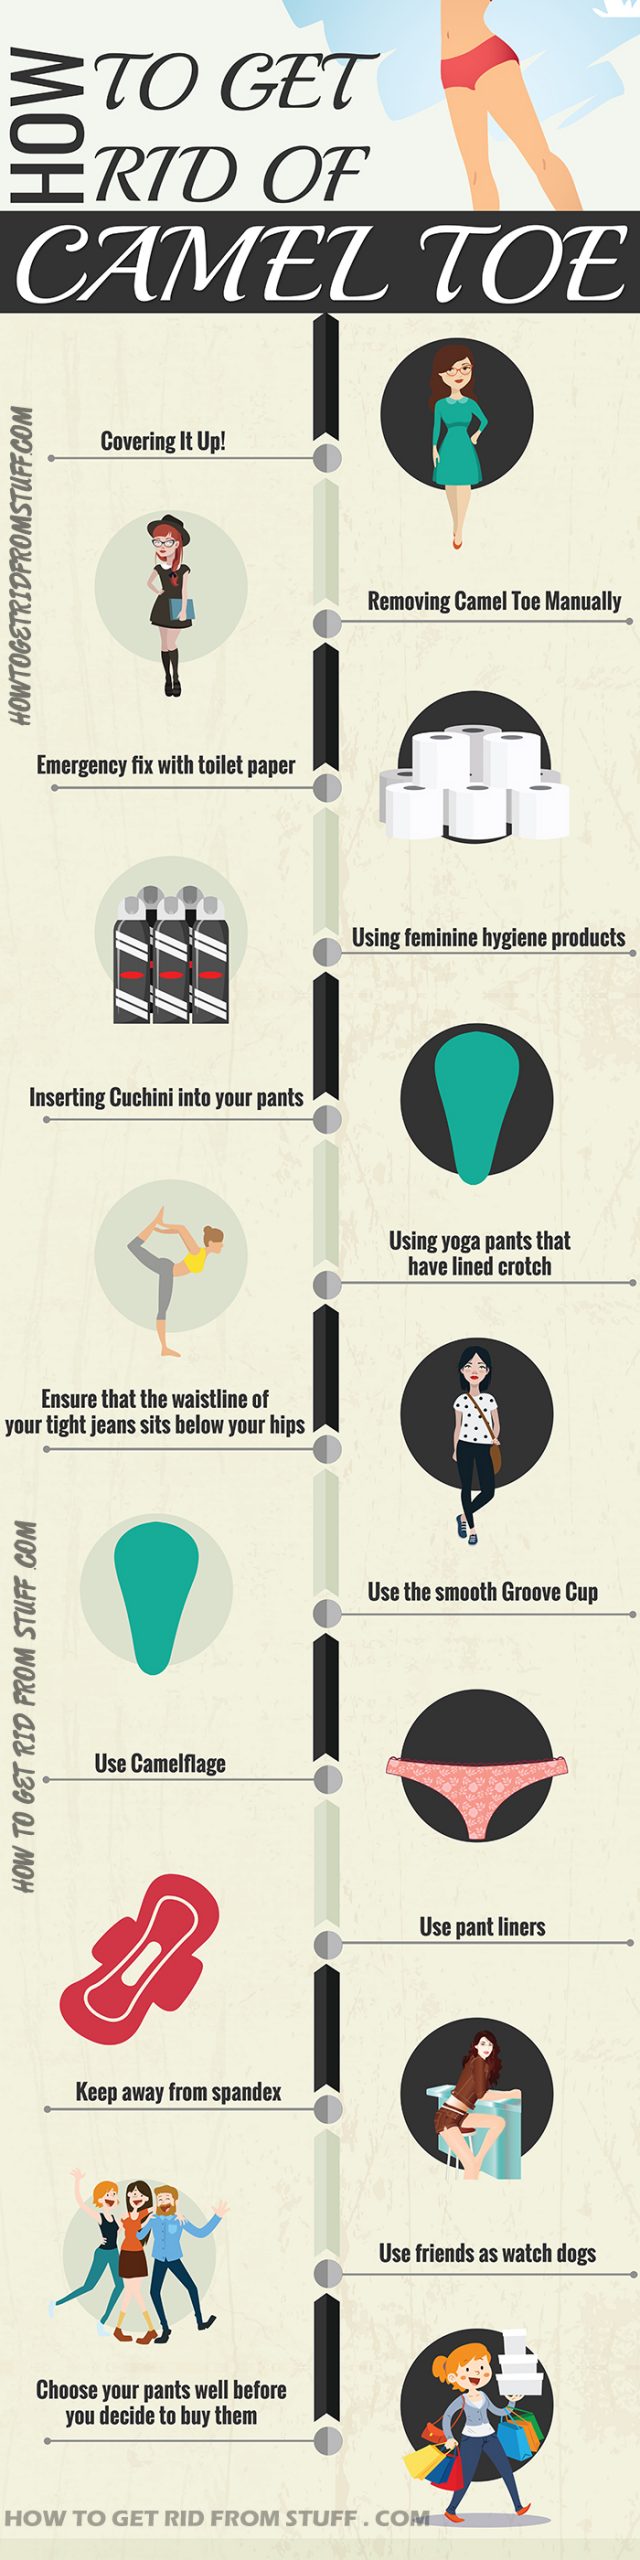 how to get rid of camel toe infographic